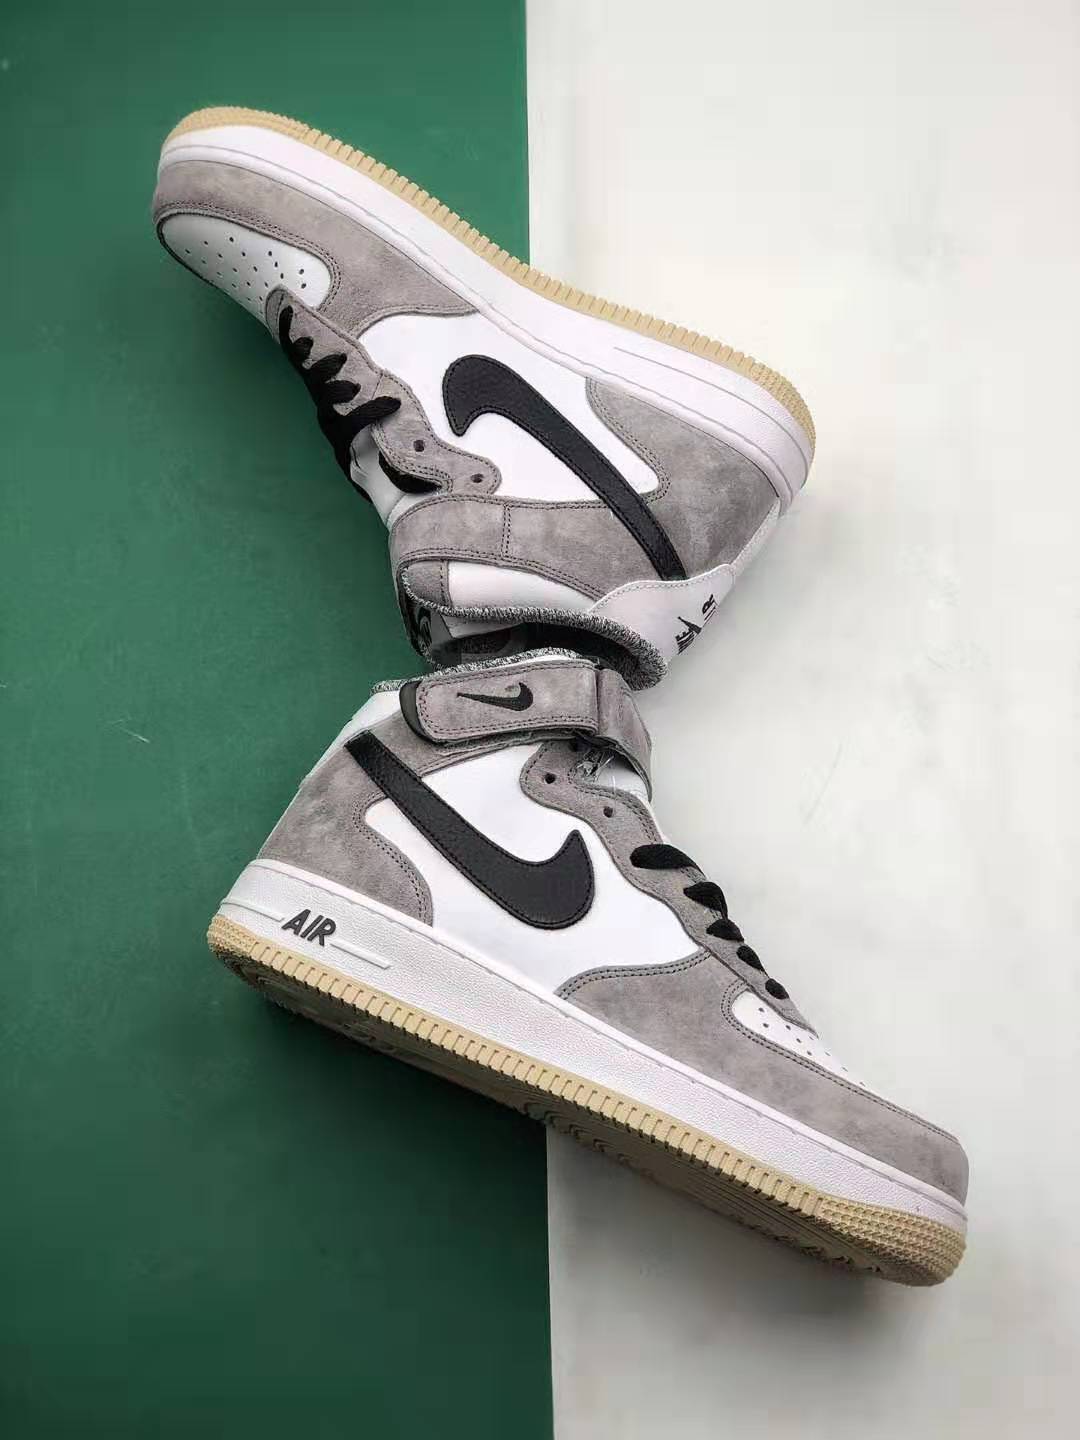 Nike Air Force 1 Mid 07 Light Grey White Black 808790-107 - Buy Now and Elevate Your Style